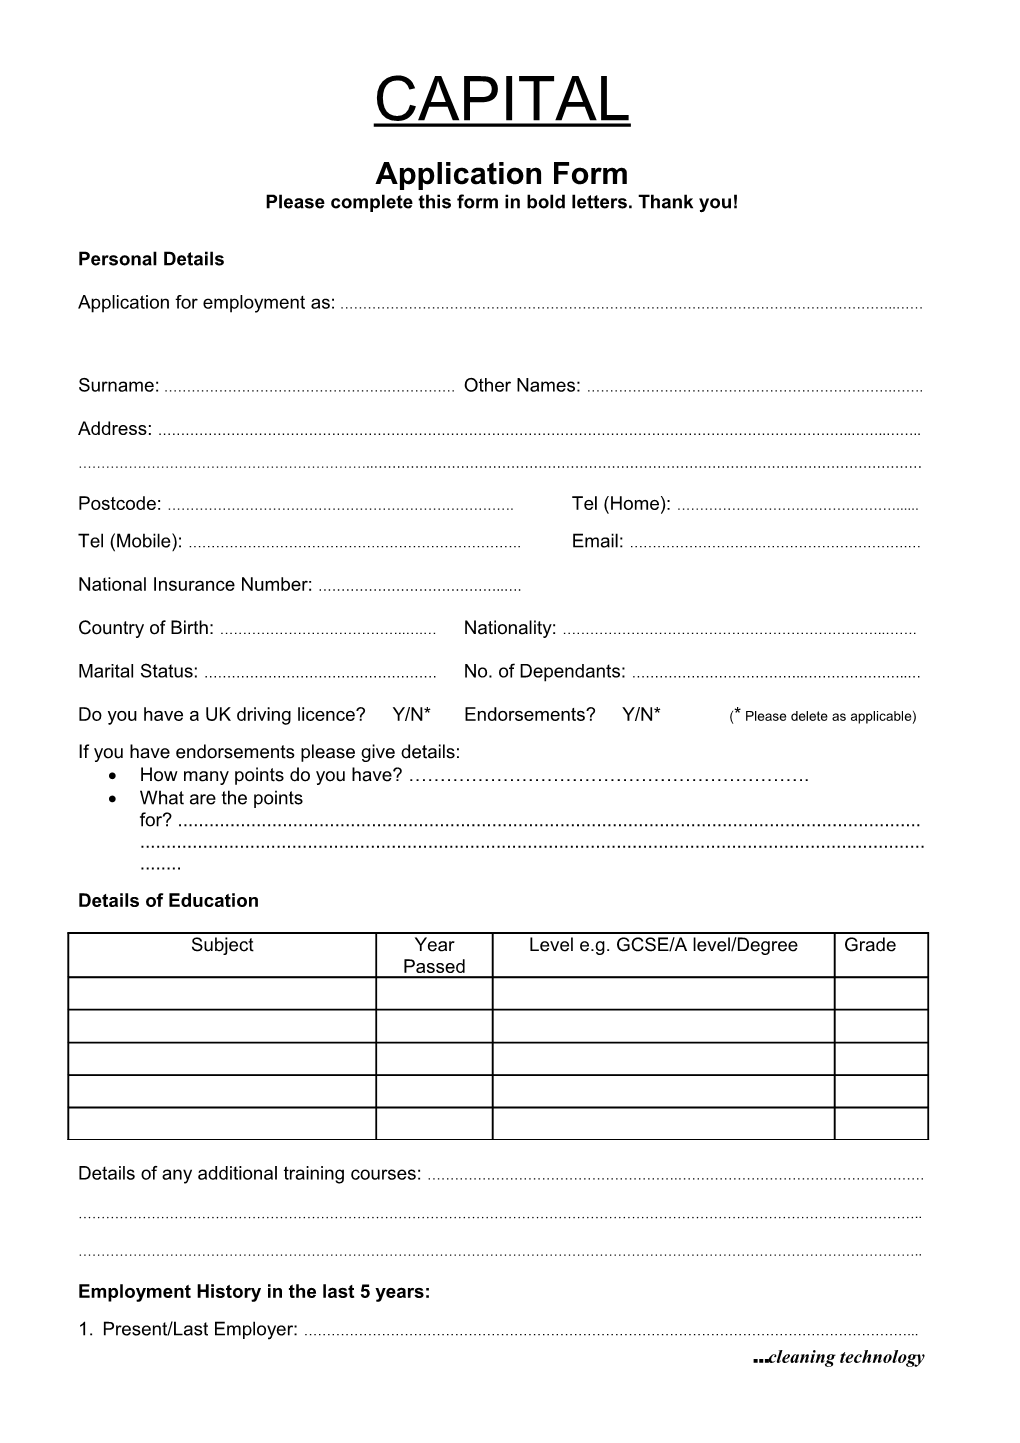 Please Complete This Form in Bold Letters. Thank You!